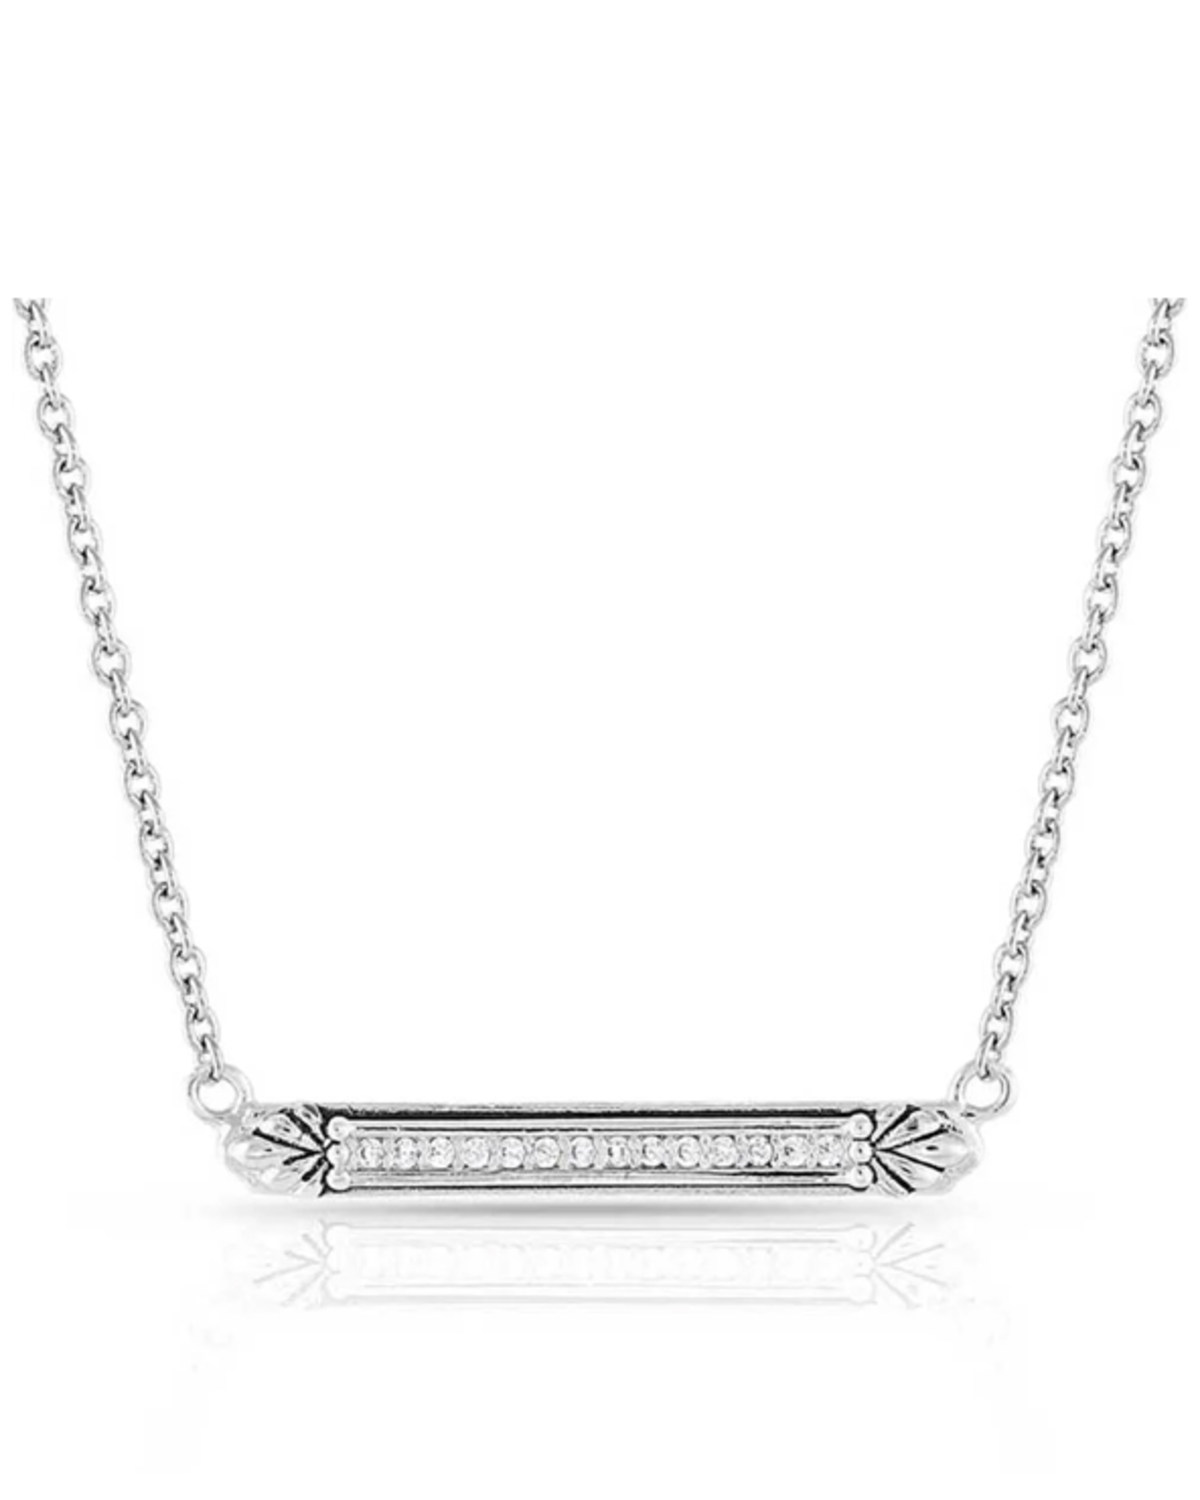 Montana Silversmiths Women's Setting the Crystal Bar Necklace